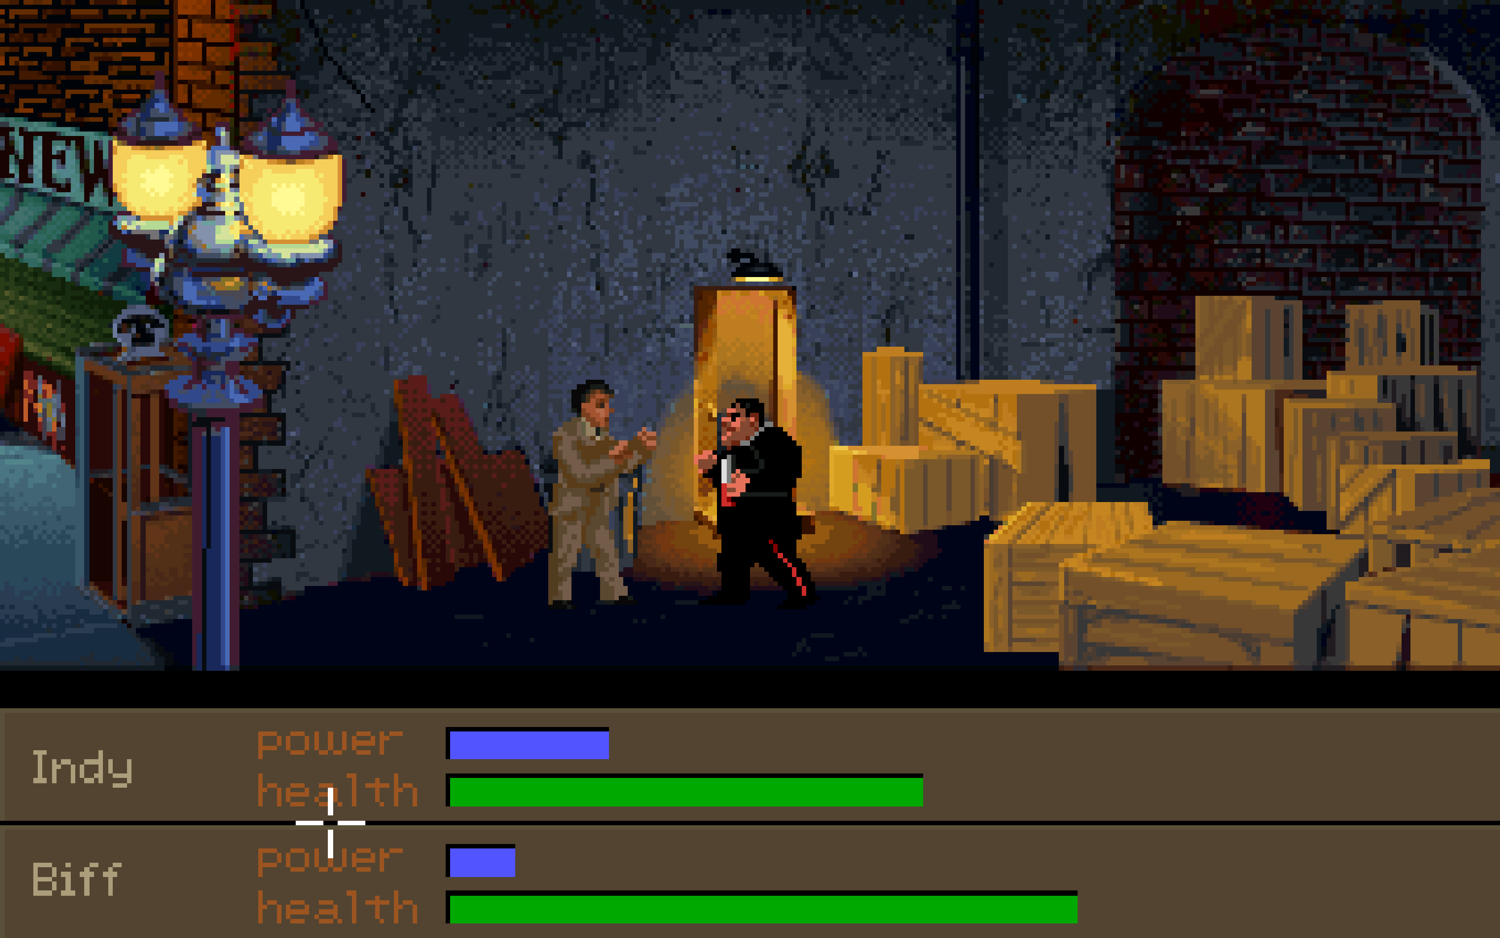 A screenshot of the fighting mechanic in Indiana Jones and the Fate of Atlantis. Indy and Biff are squaring up in the alley behind the theatre.